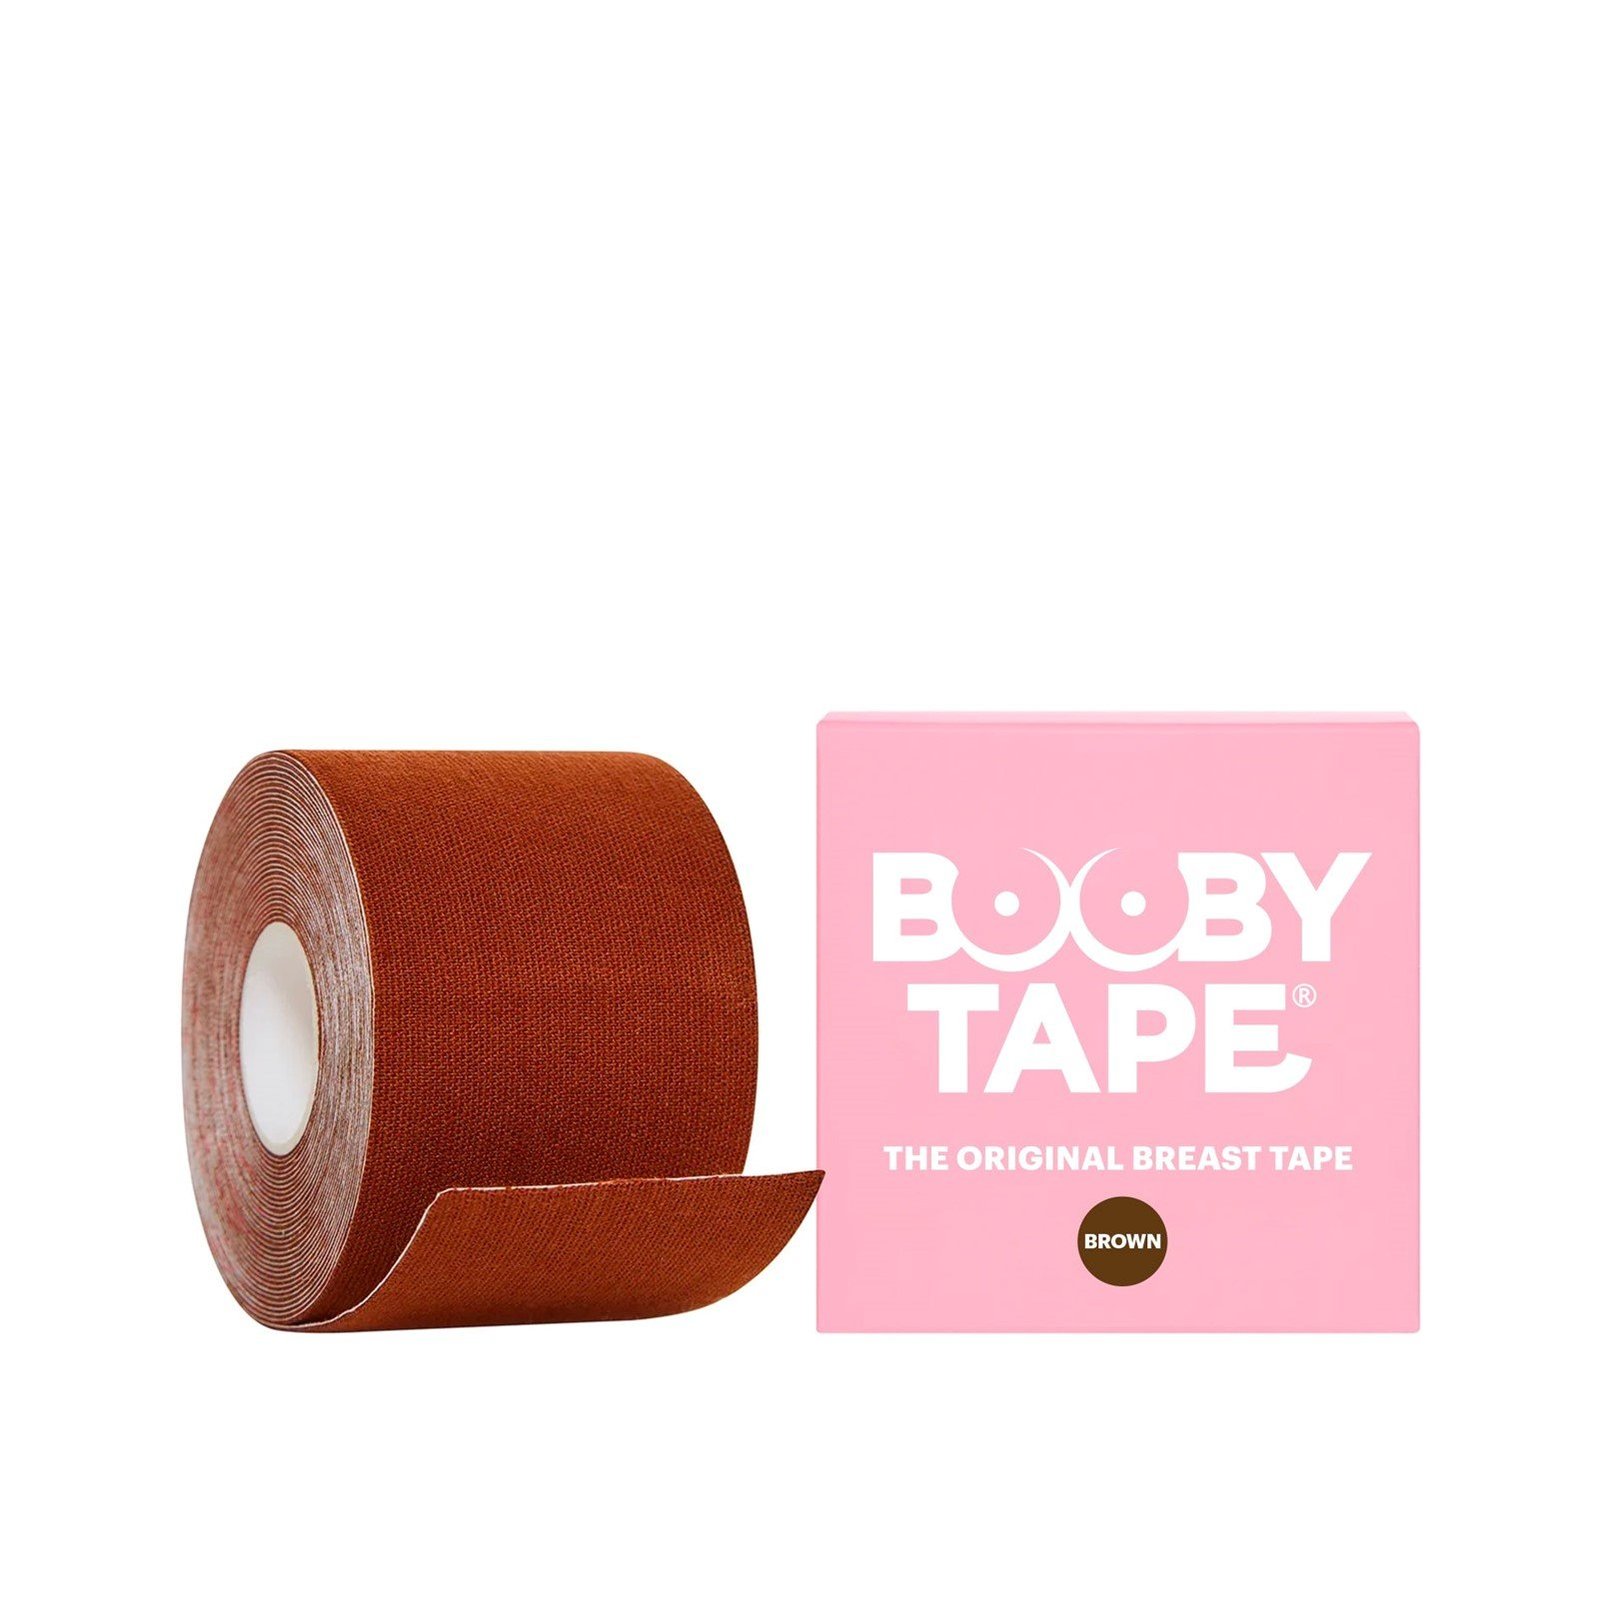 Booby Tape The Original Breast Tape Brown 5m